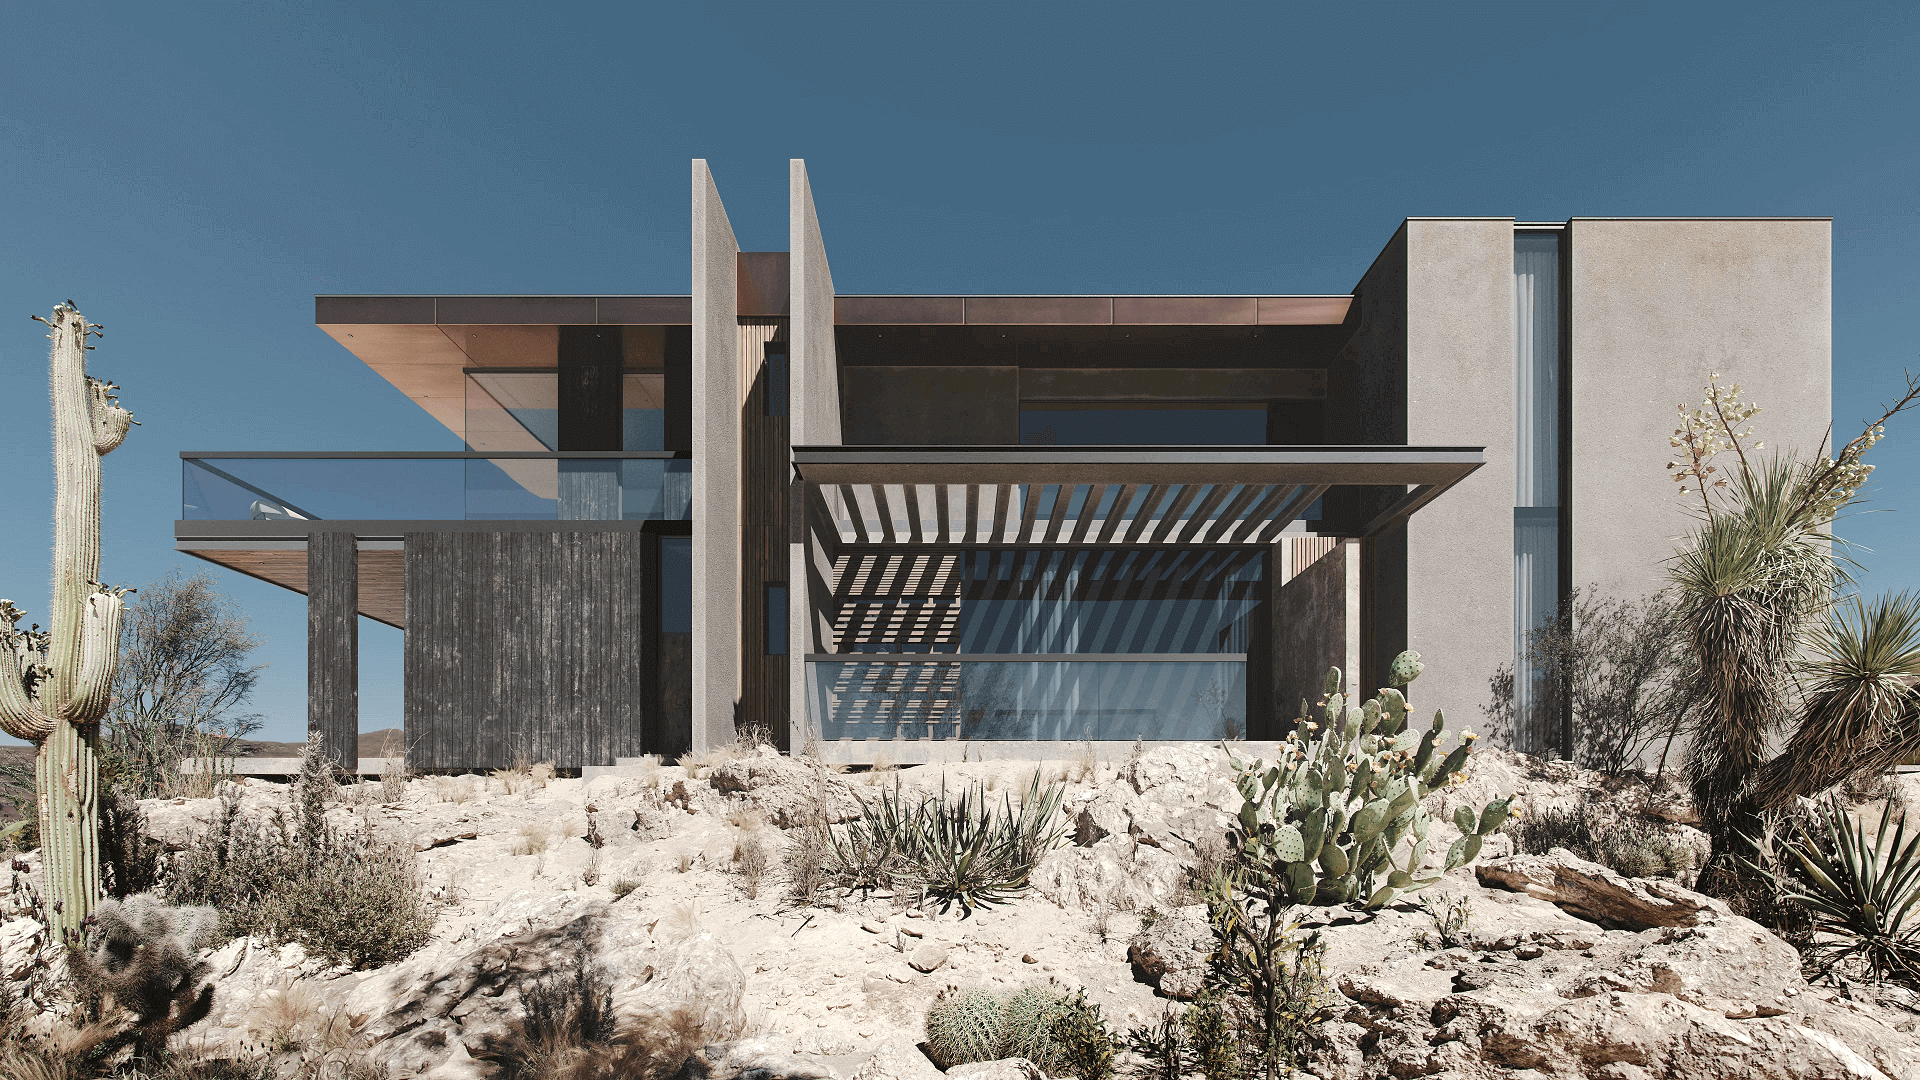 Exterior Render Made in Corona Software